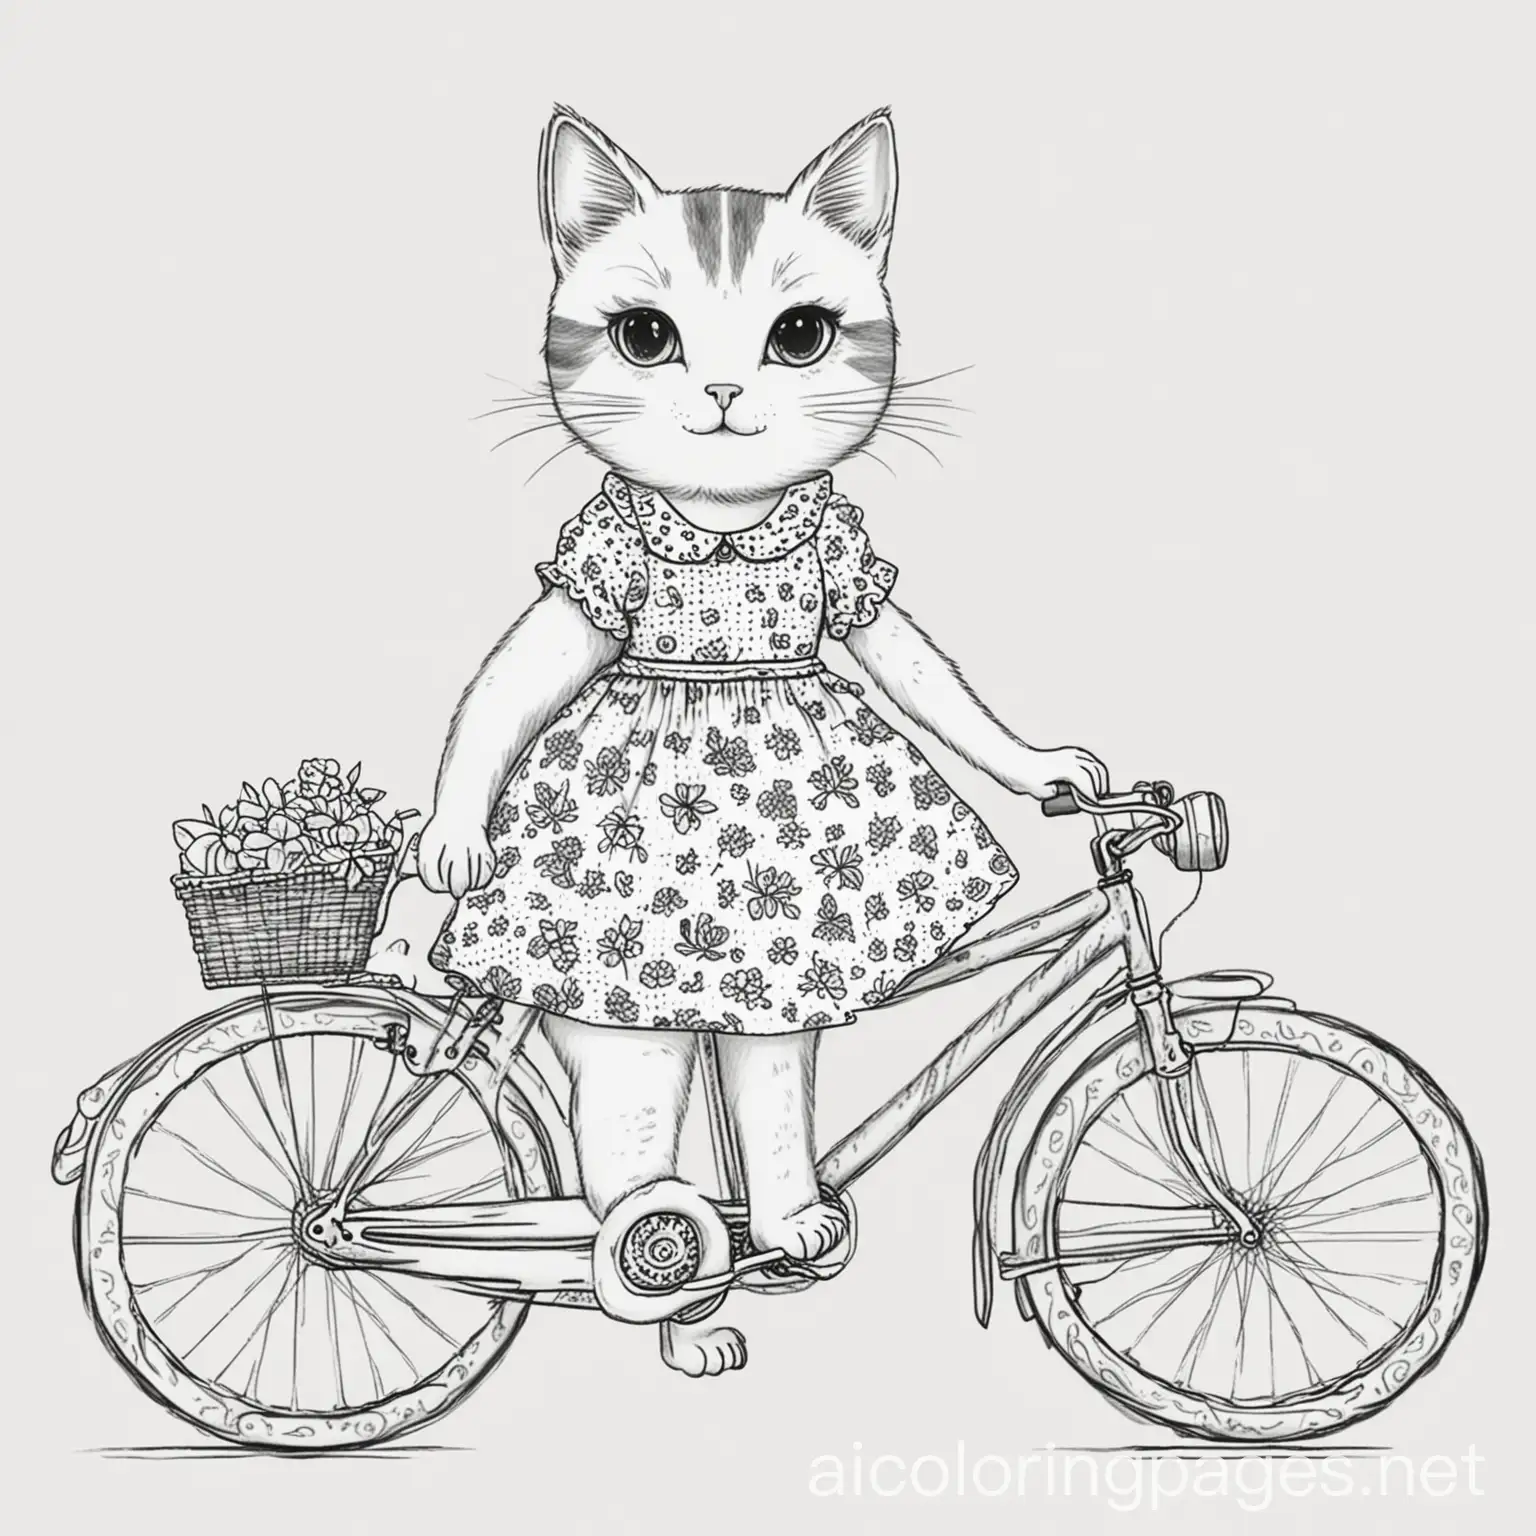 Cute-Cat-Riding-Bicycle-Coloring-Page-in-Black-and-White-Line-Art